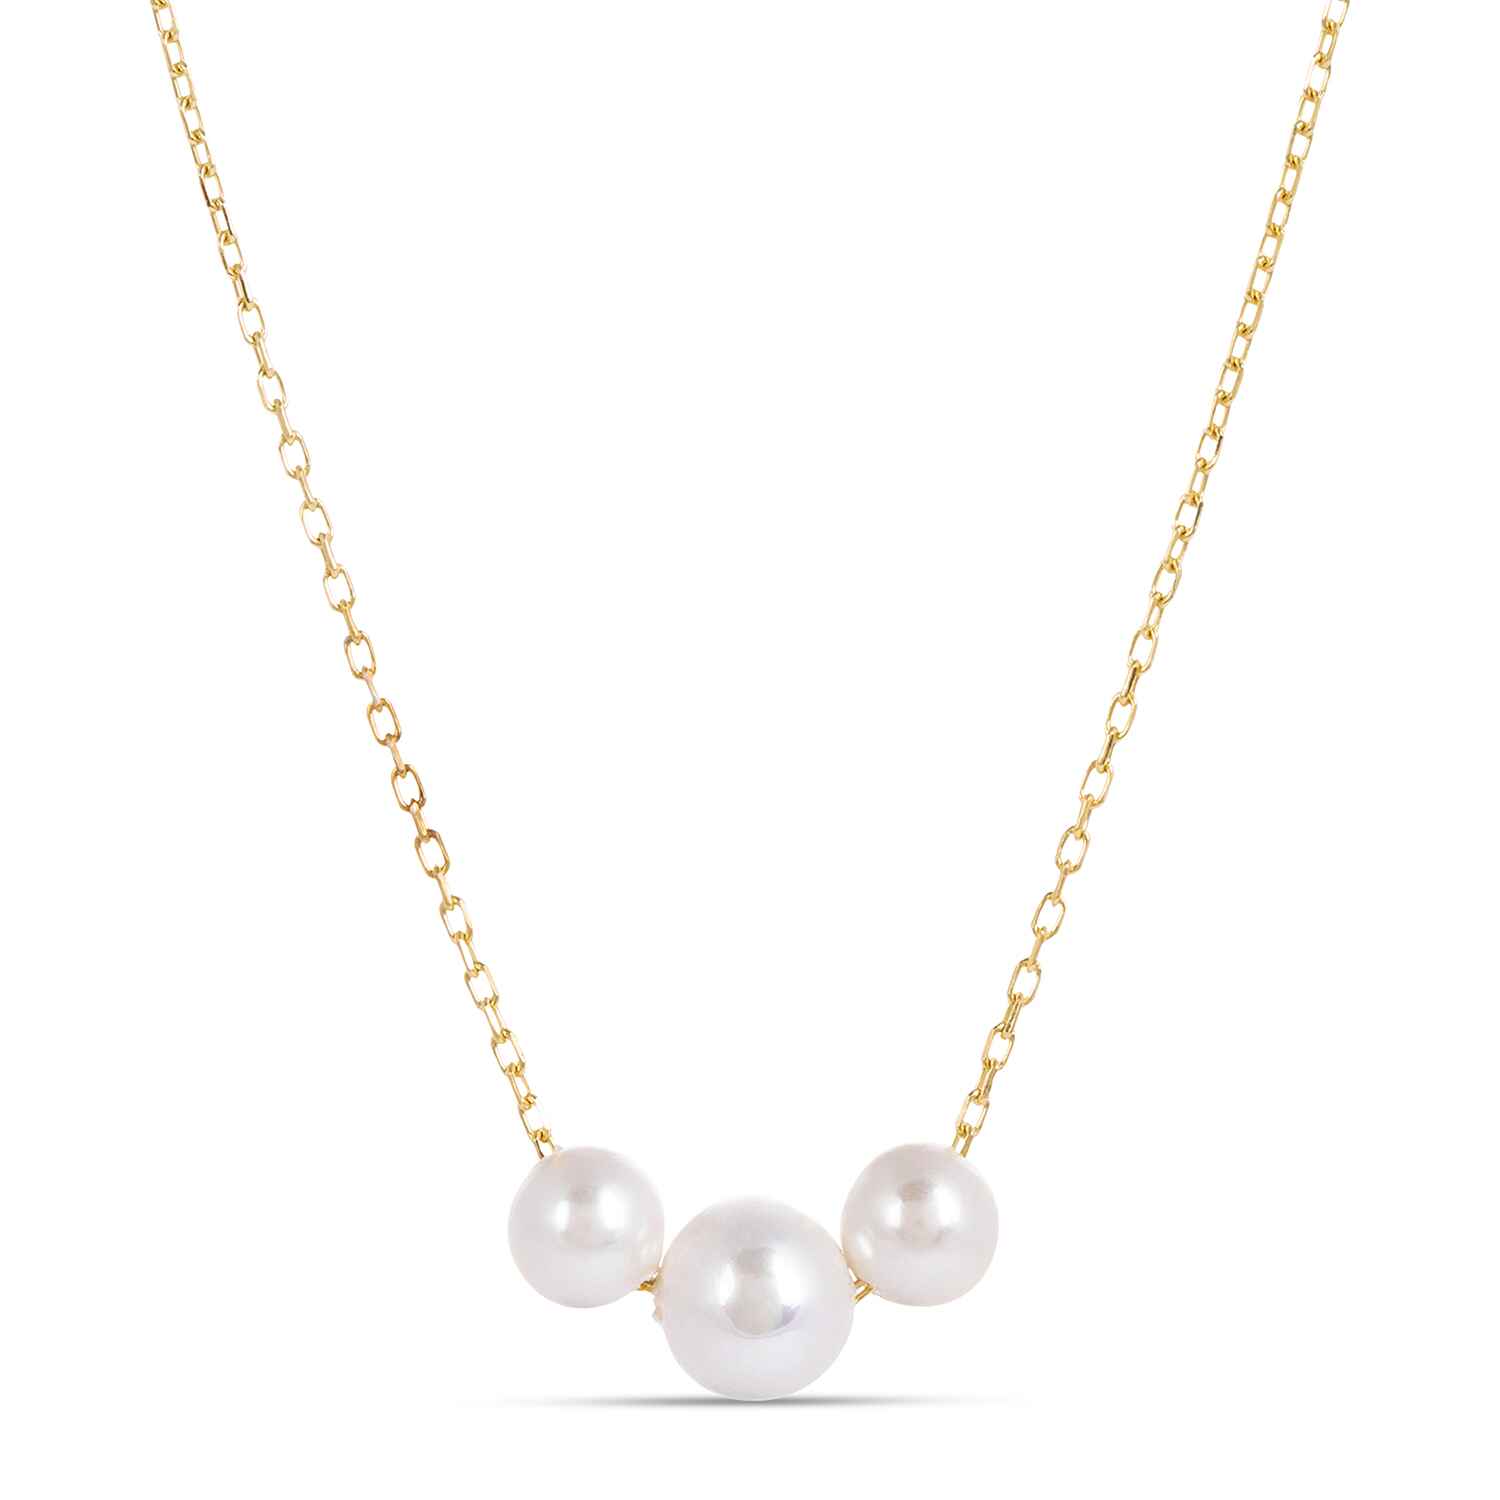 Our Laura Gold Chain Necklace is adorned with three vintage white pearls. Hanmade in recycled gold, this very delicate chain necklace is all about simplicity